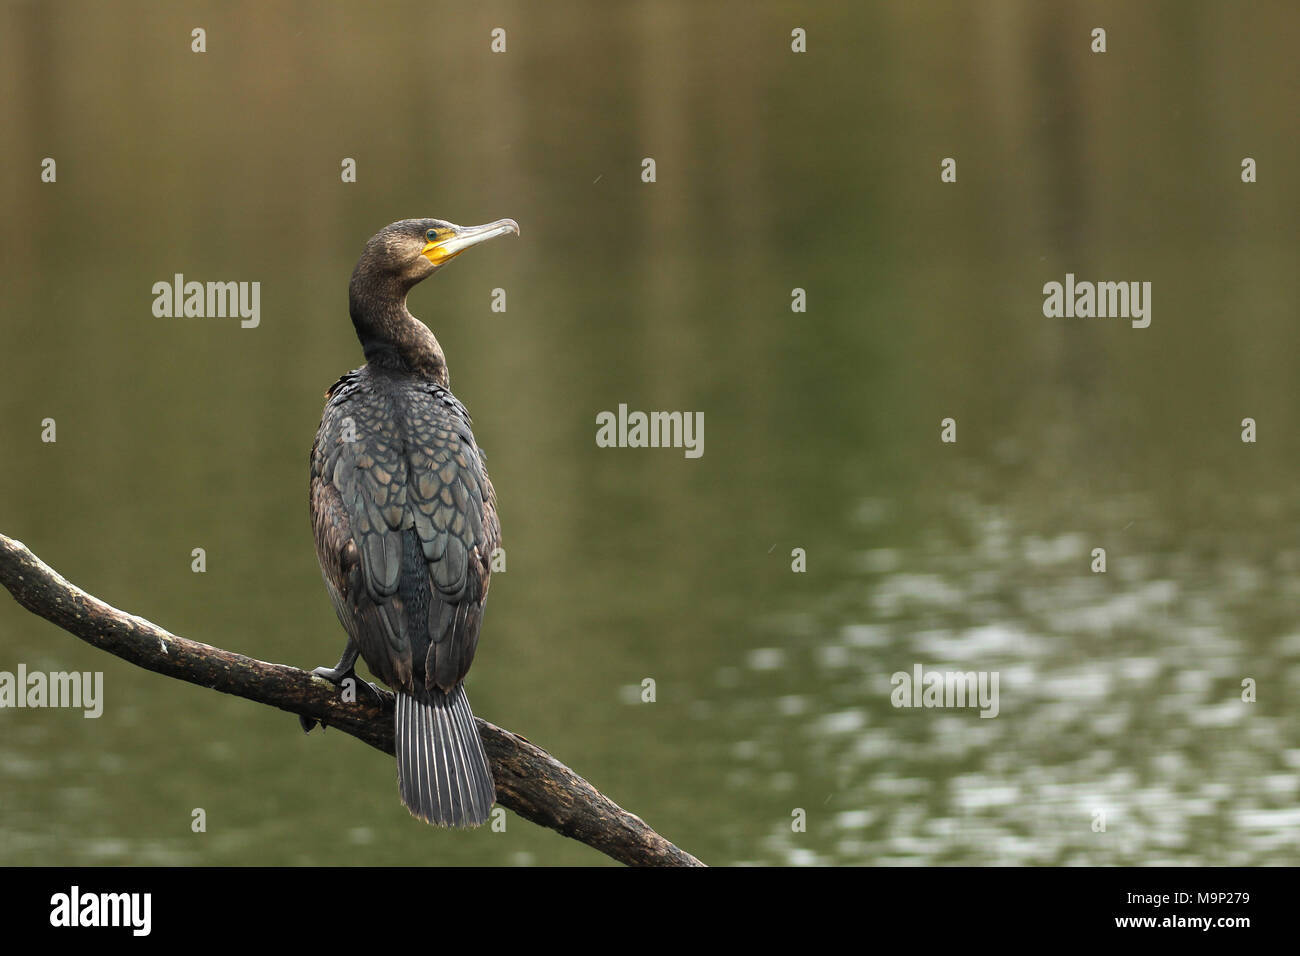 Great cormorant (Phalacrocorax carbo) sits in rain on a branch above the water, Allgäu, Bavaria, Germany Stock Photo